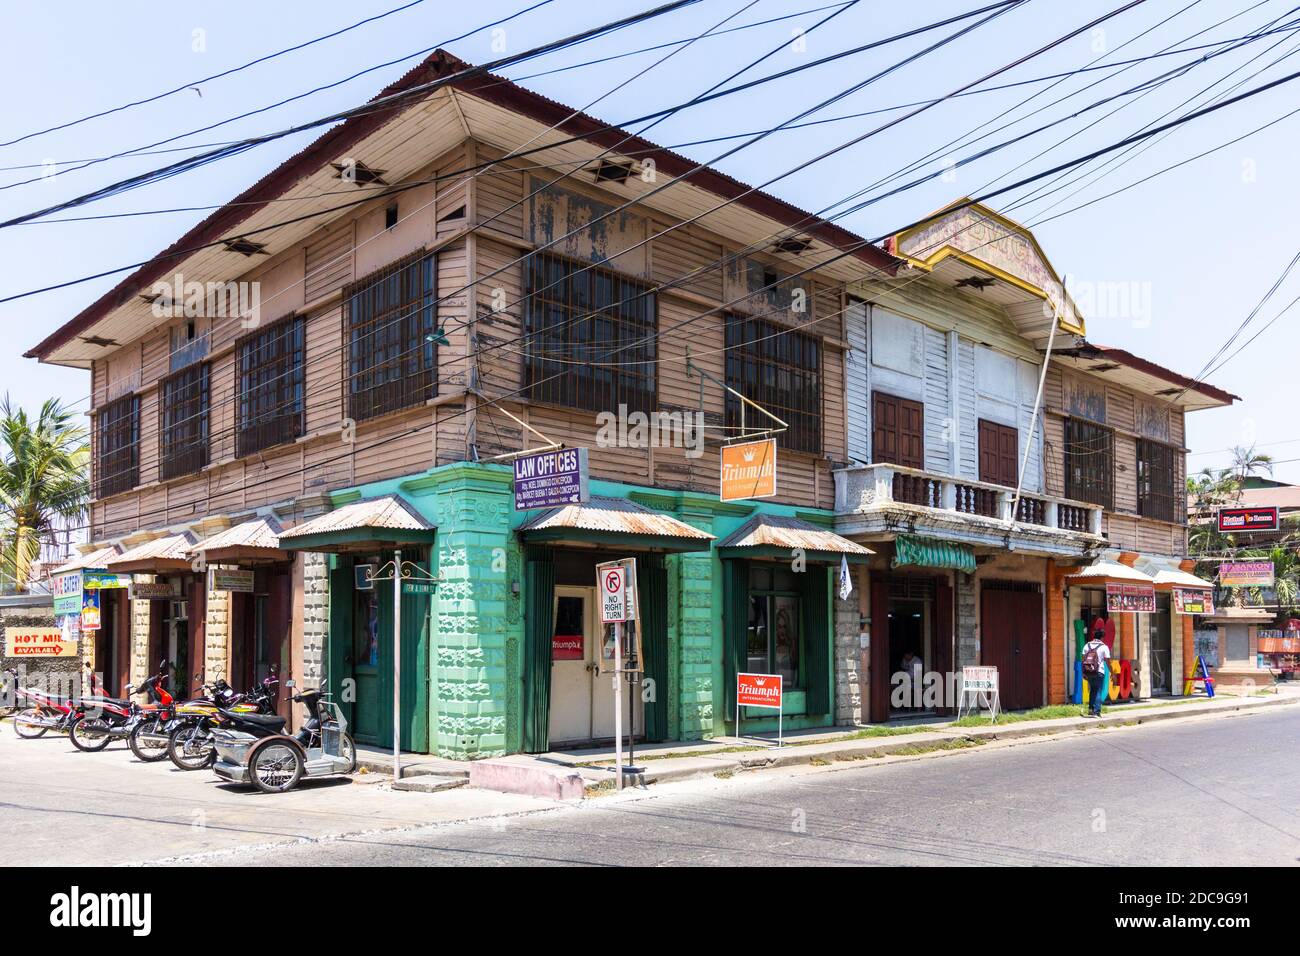 A heritage house with shops at the ground floor in Laoag City, Philippines Stock Photo